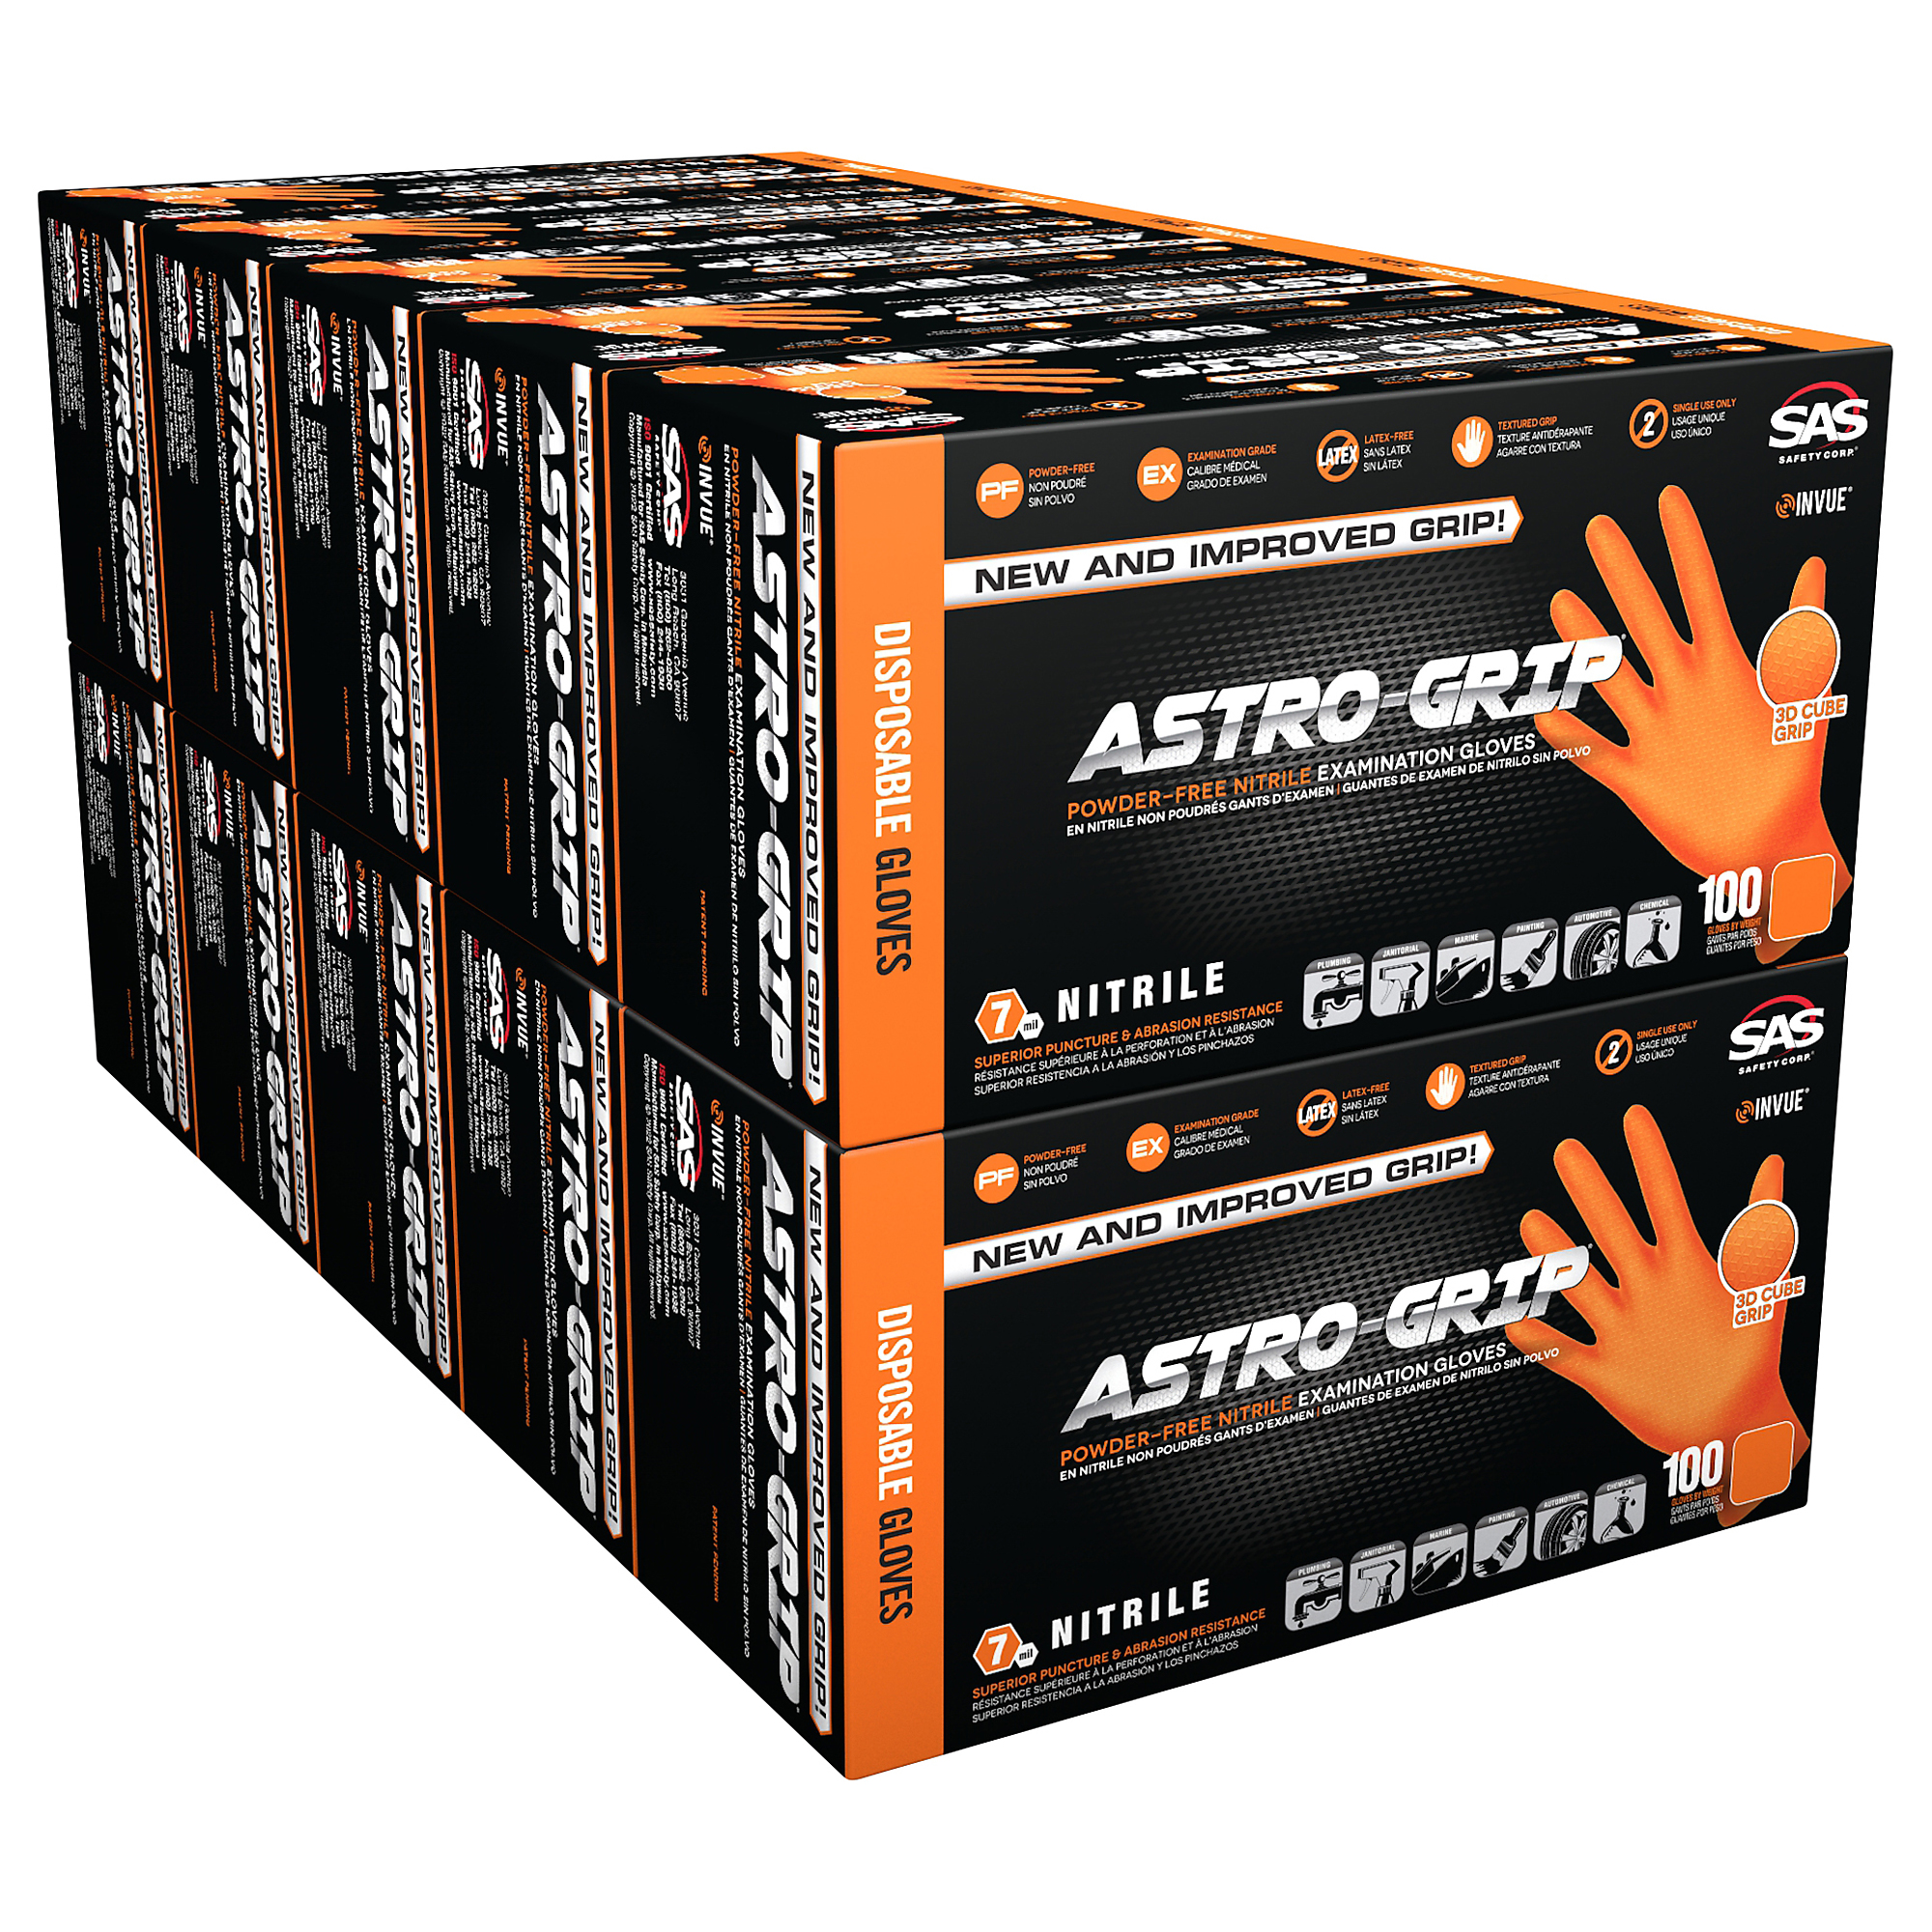 AstroGrip, 1000 Astro-Grip Disposable Gloves PF Nitrile 7mil, Size L, Color Orange, Included (qty.) 1000 Model 66473CASE